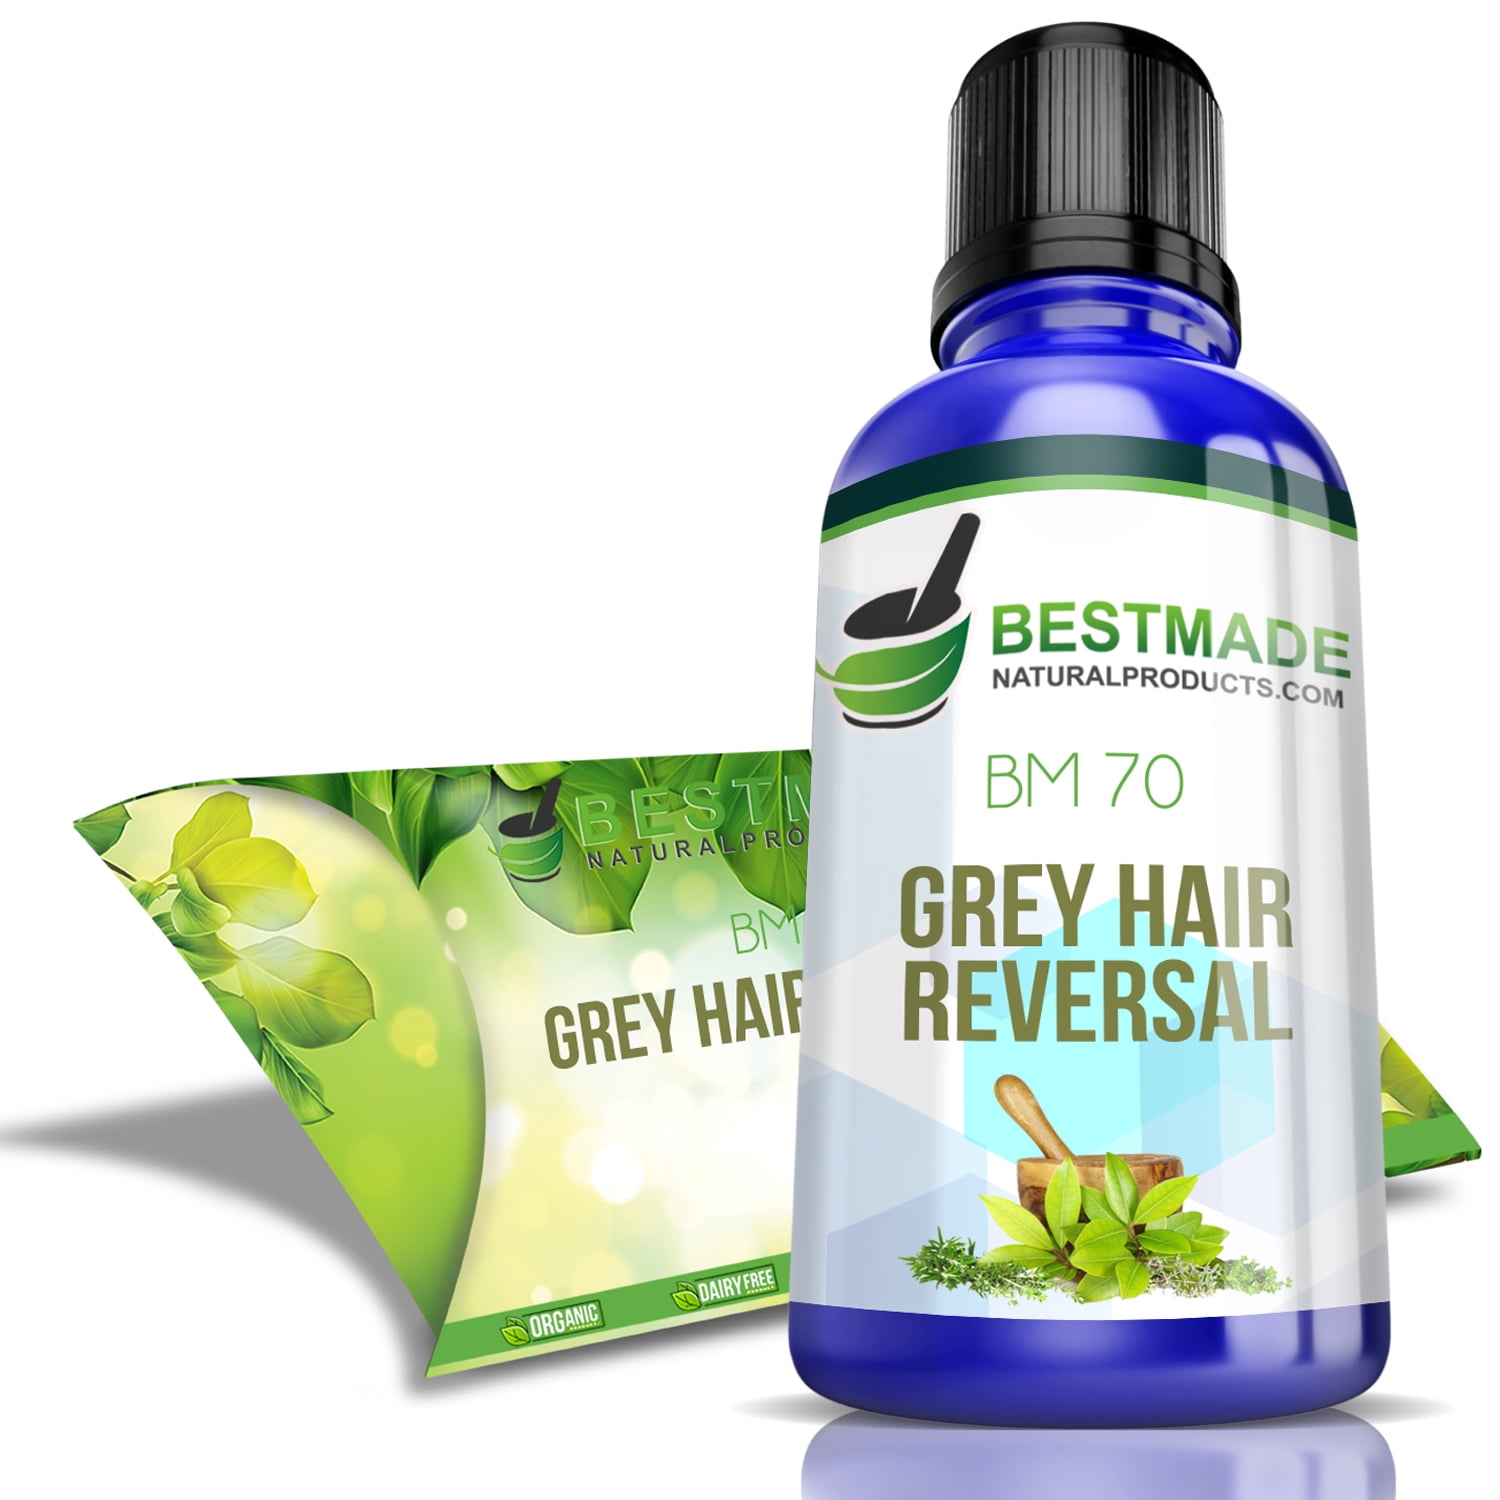 Grey Hair Reversal, BM70, Treatment for Premature Greying of Hair, 30mL -  Bestmade Natural Products 